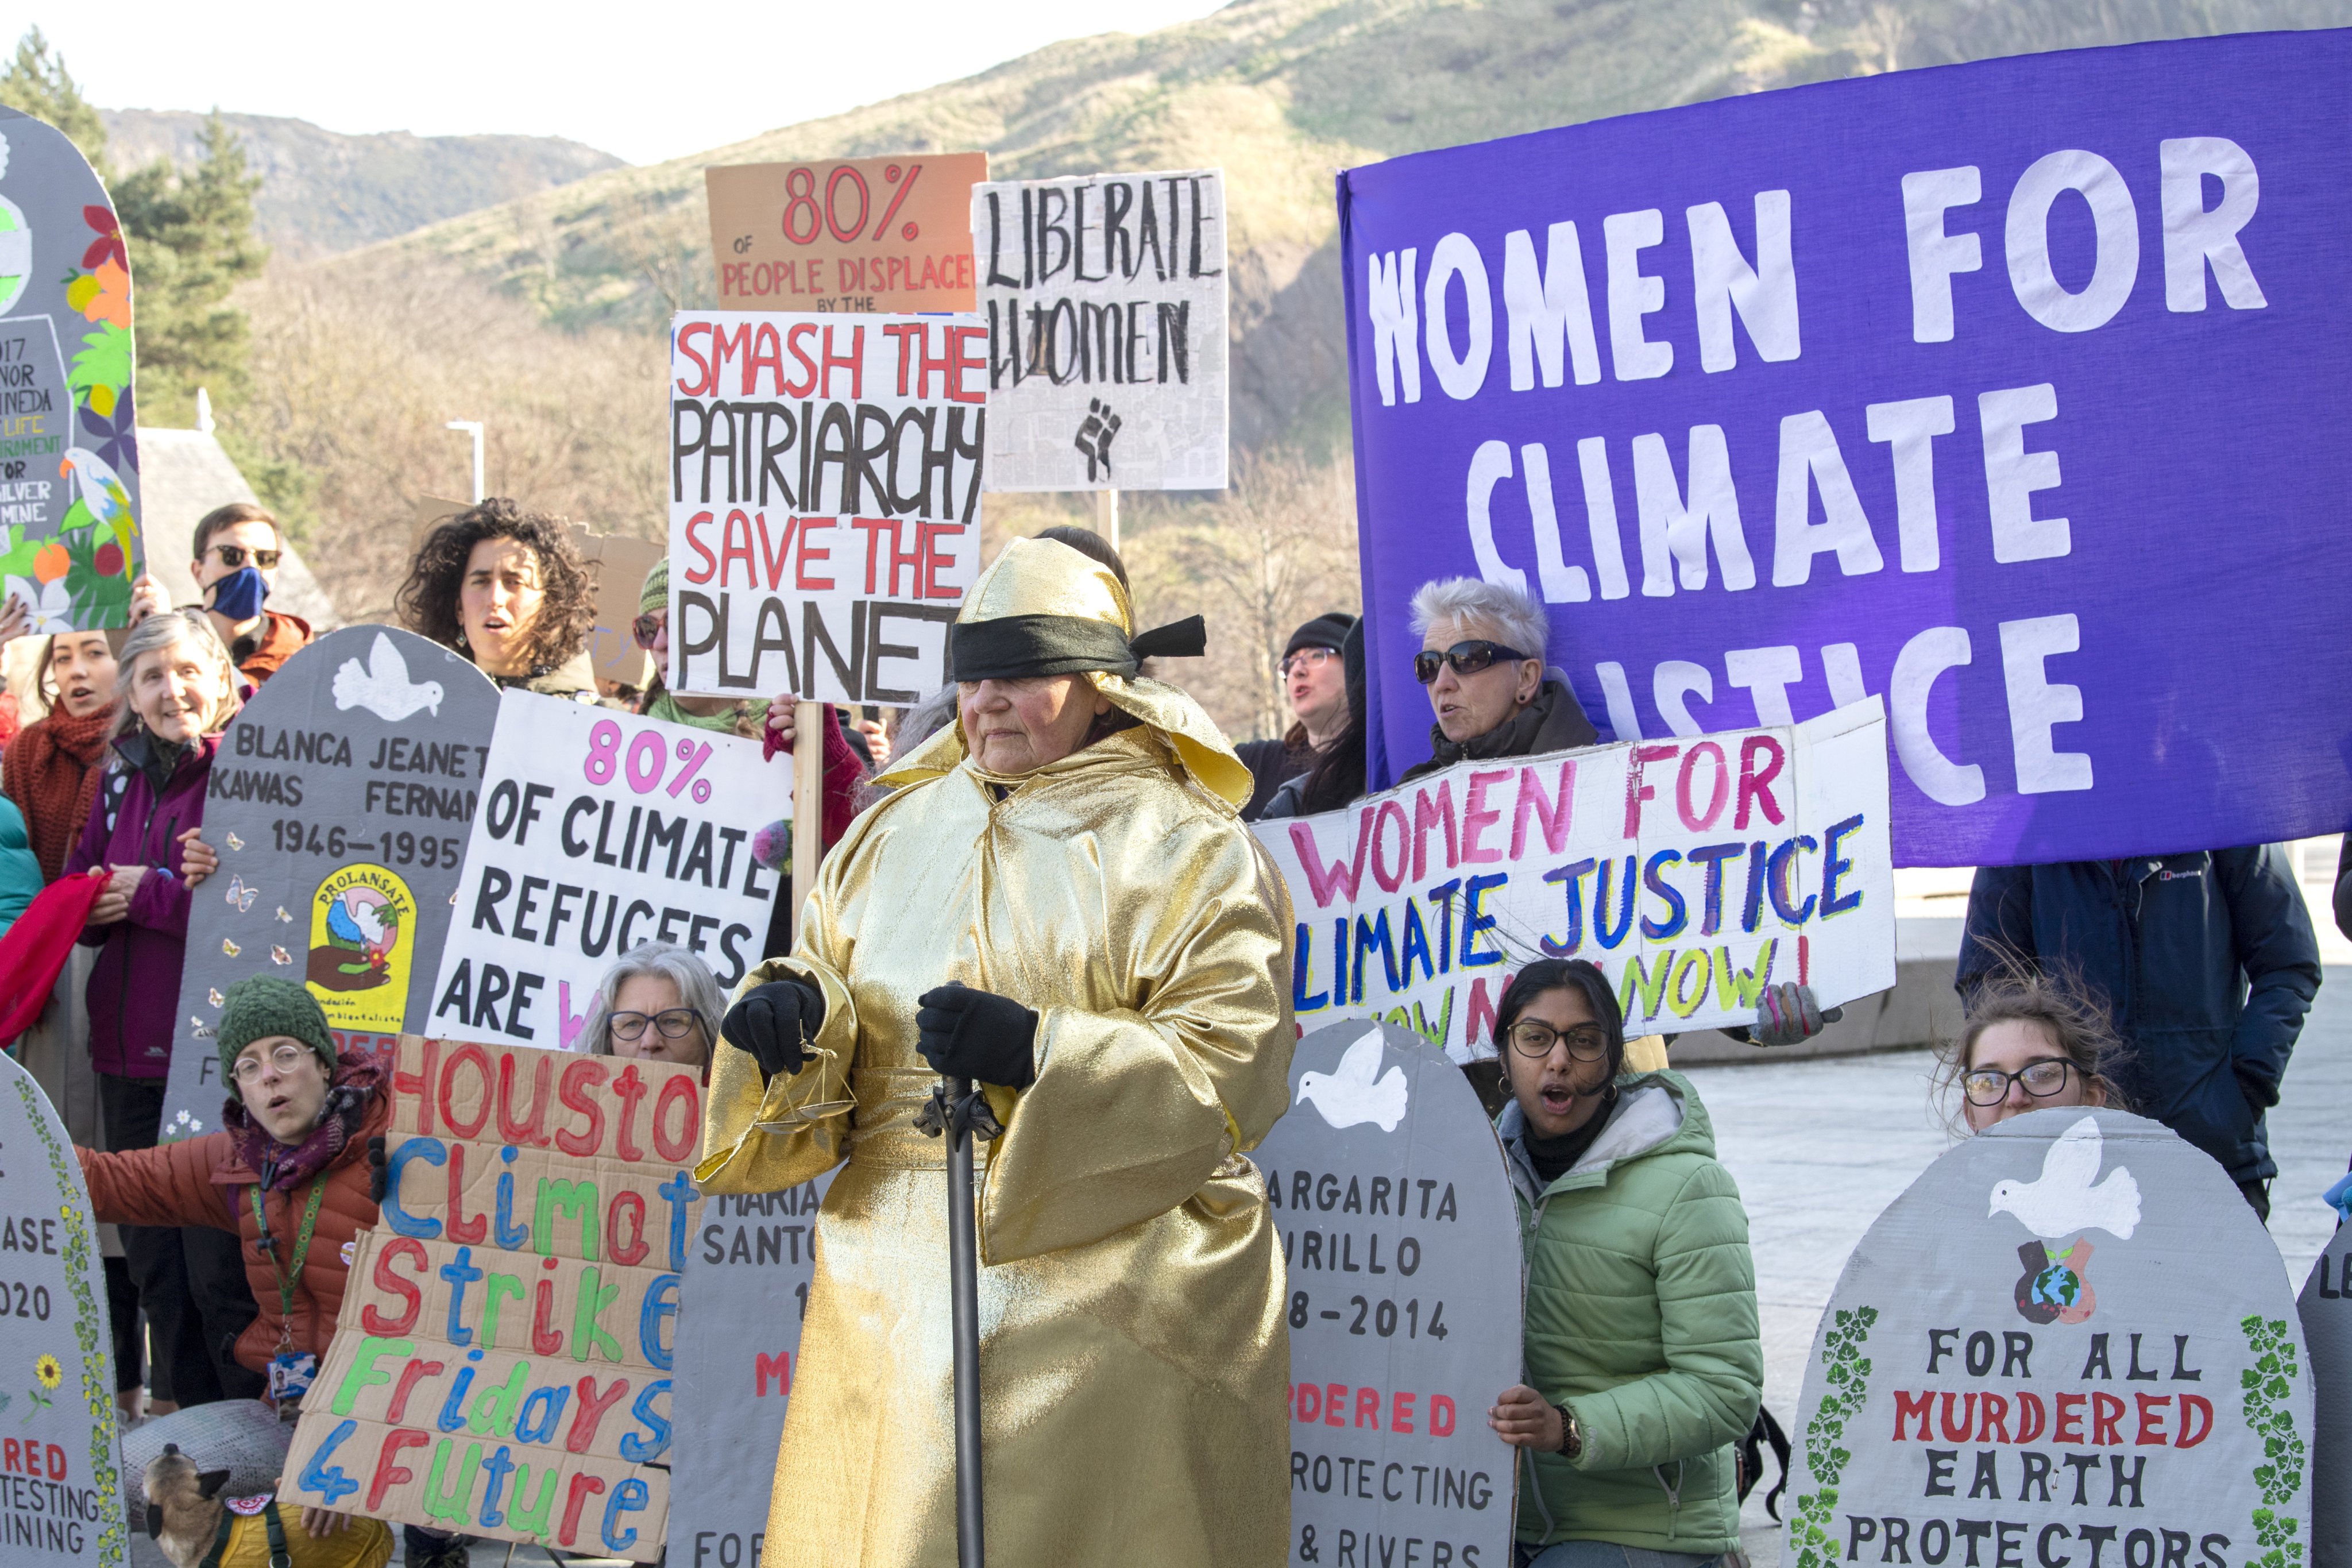 Activists hold a rally as part of the International Day of Women’s Climate Action, organised by the Women’s Climate Strike, to protest the disproportionate impacts of climate disruption on women. Photo: Lesley Martin/PA Wire/dpa